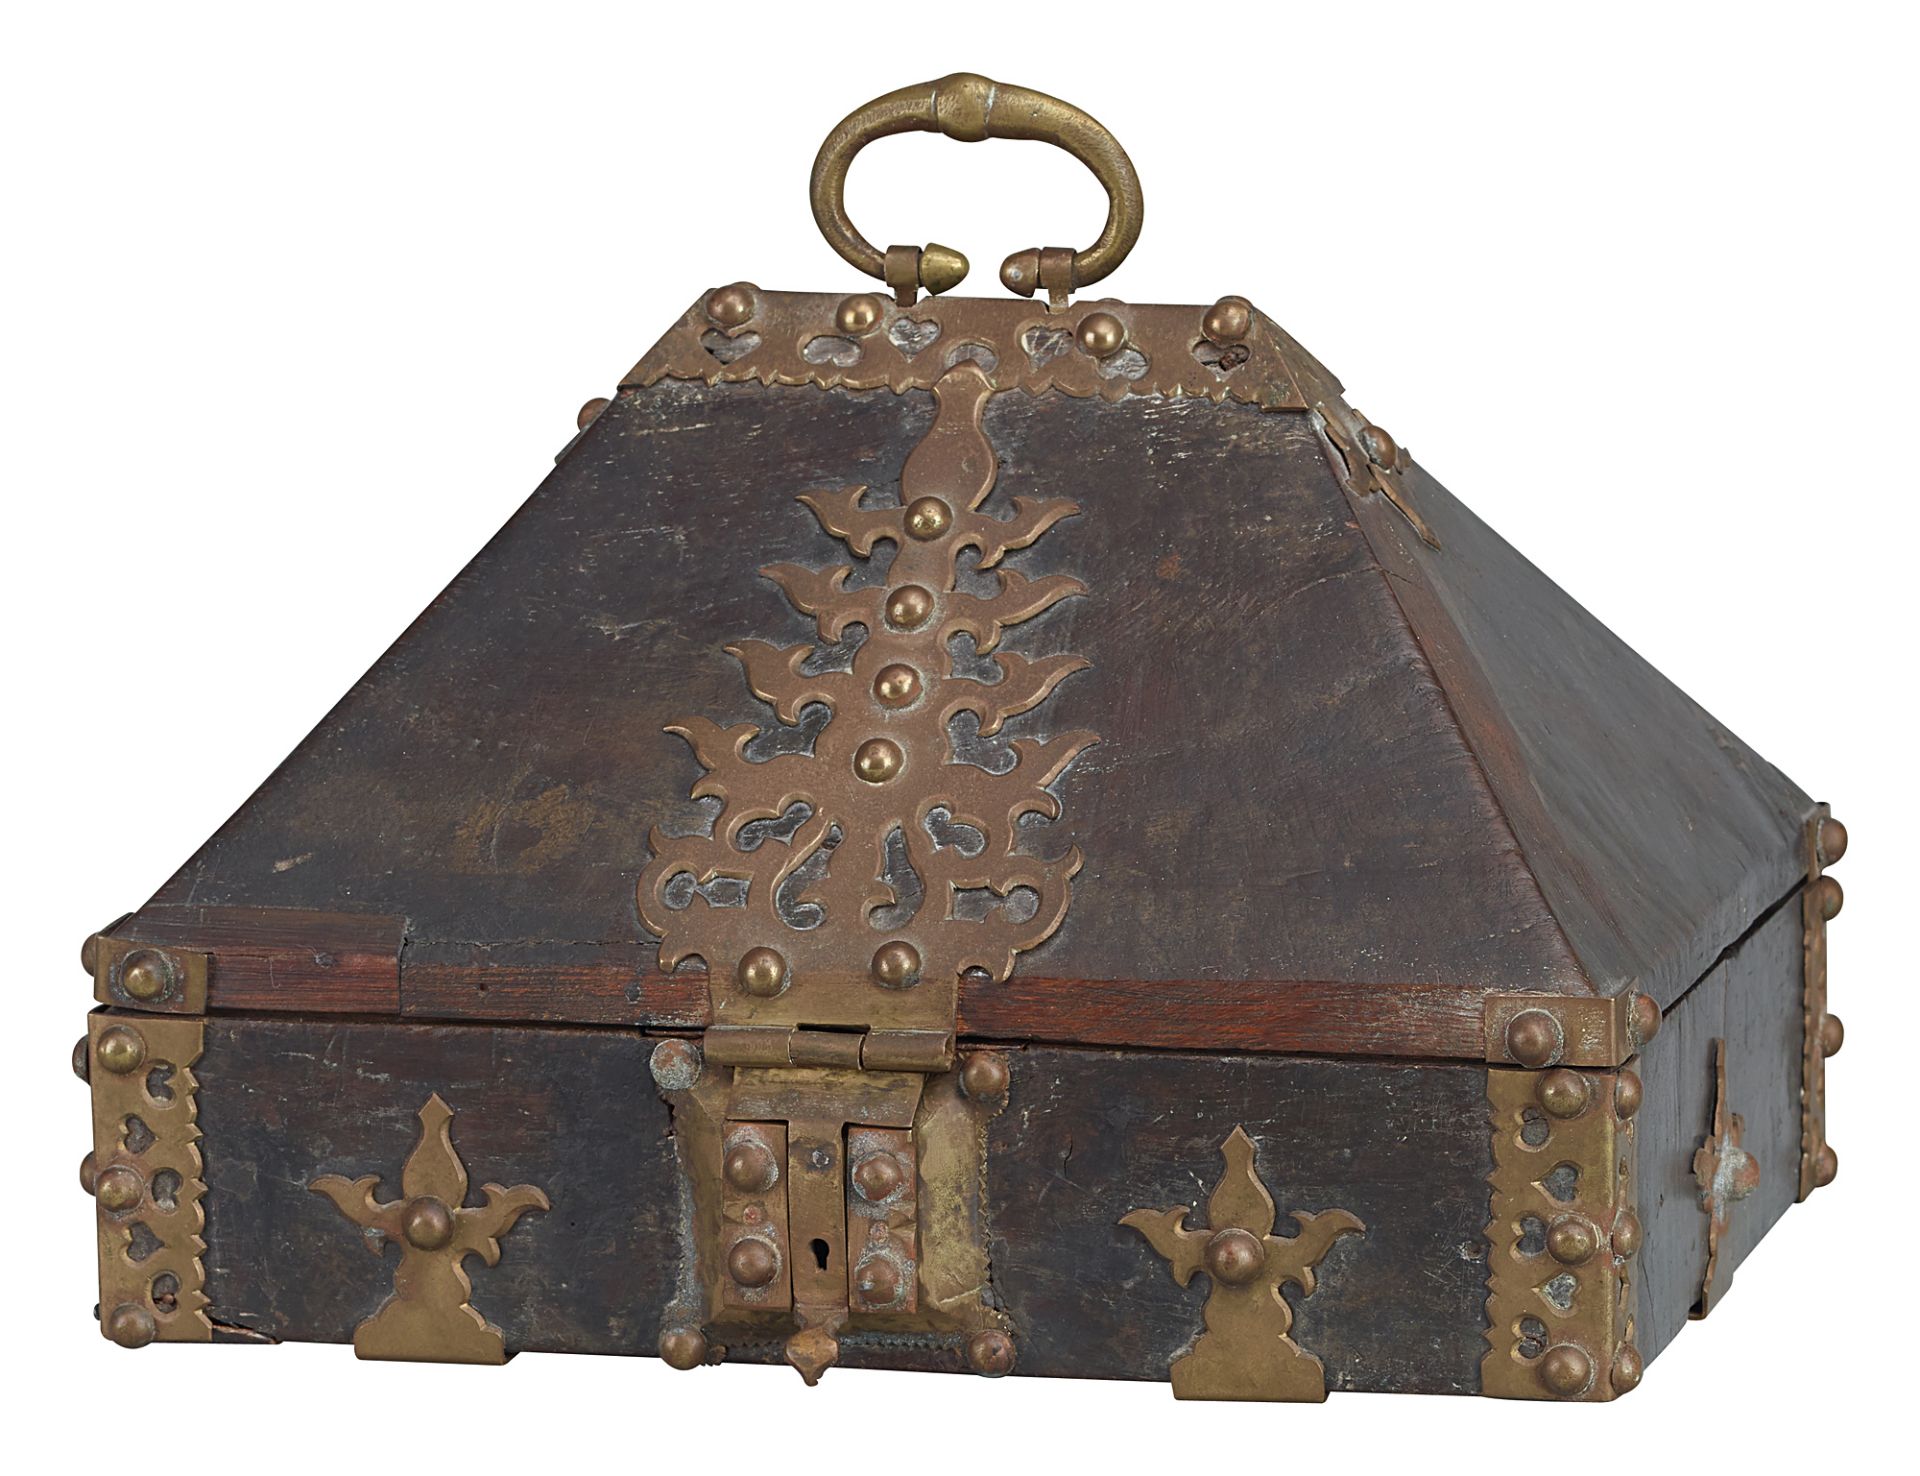 Indian chest with roof-shaped lid